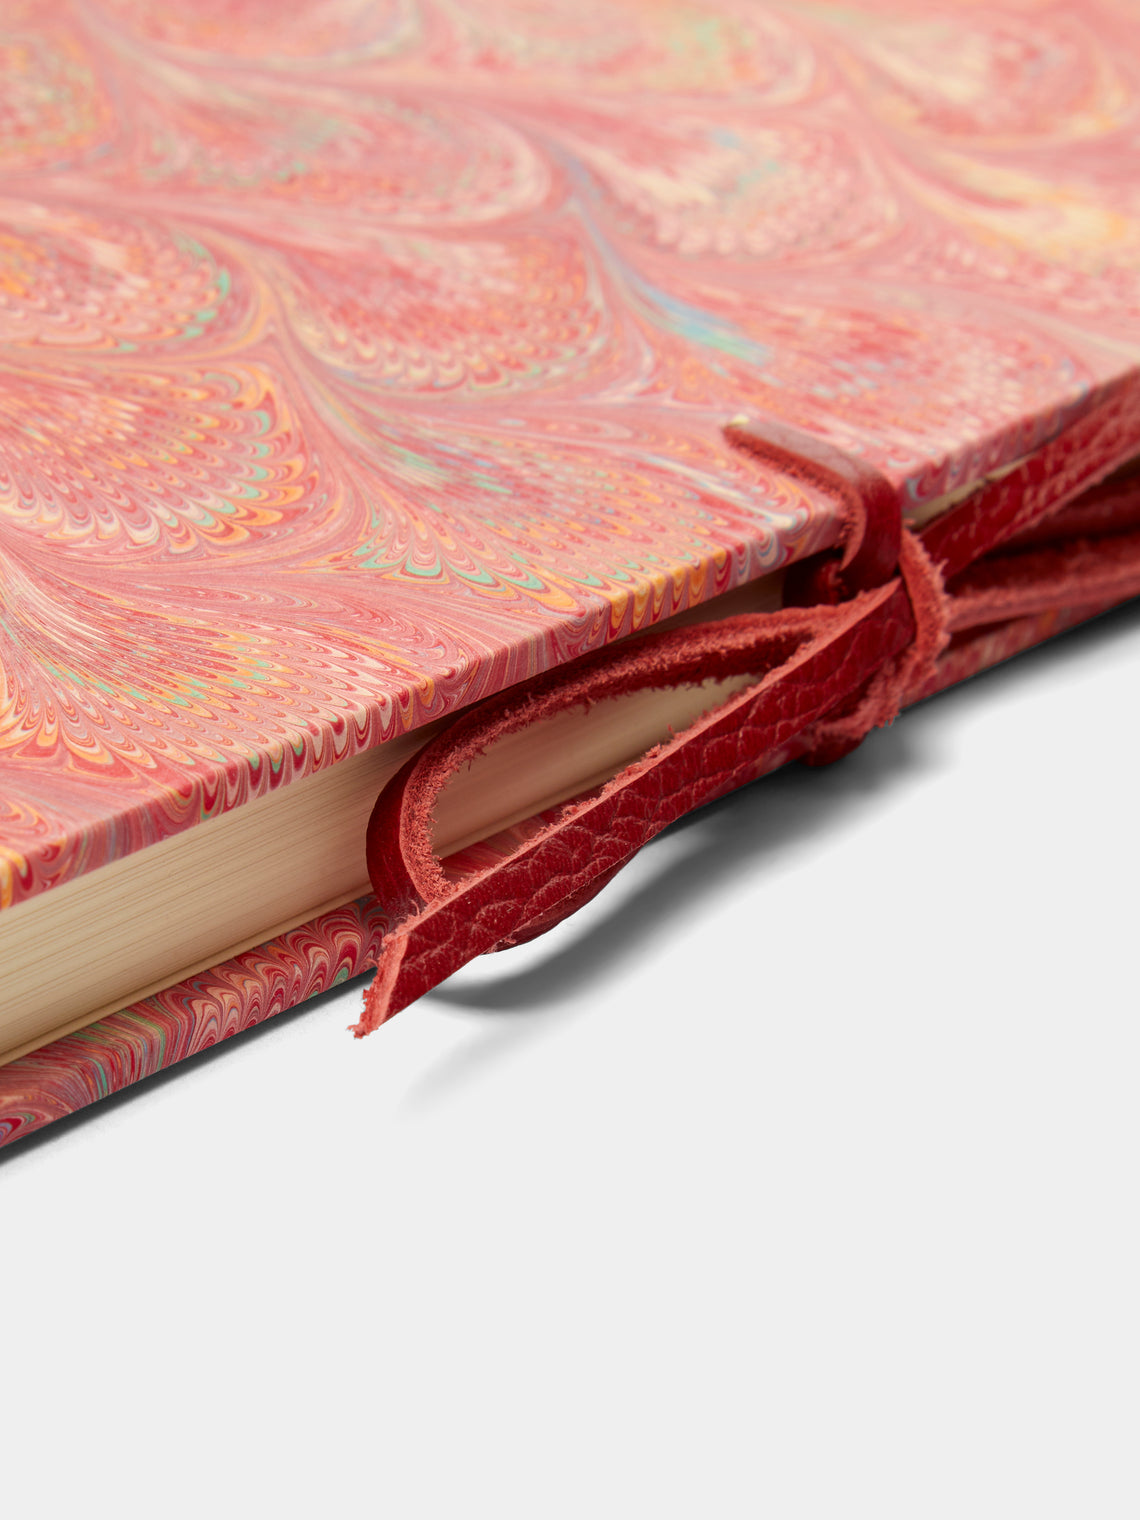 Giannini Firenze - Hand-Marbled Leather Bound Notebook - Red - ABASK